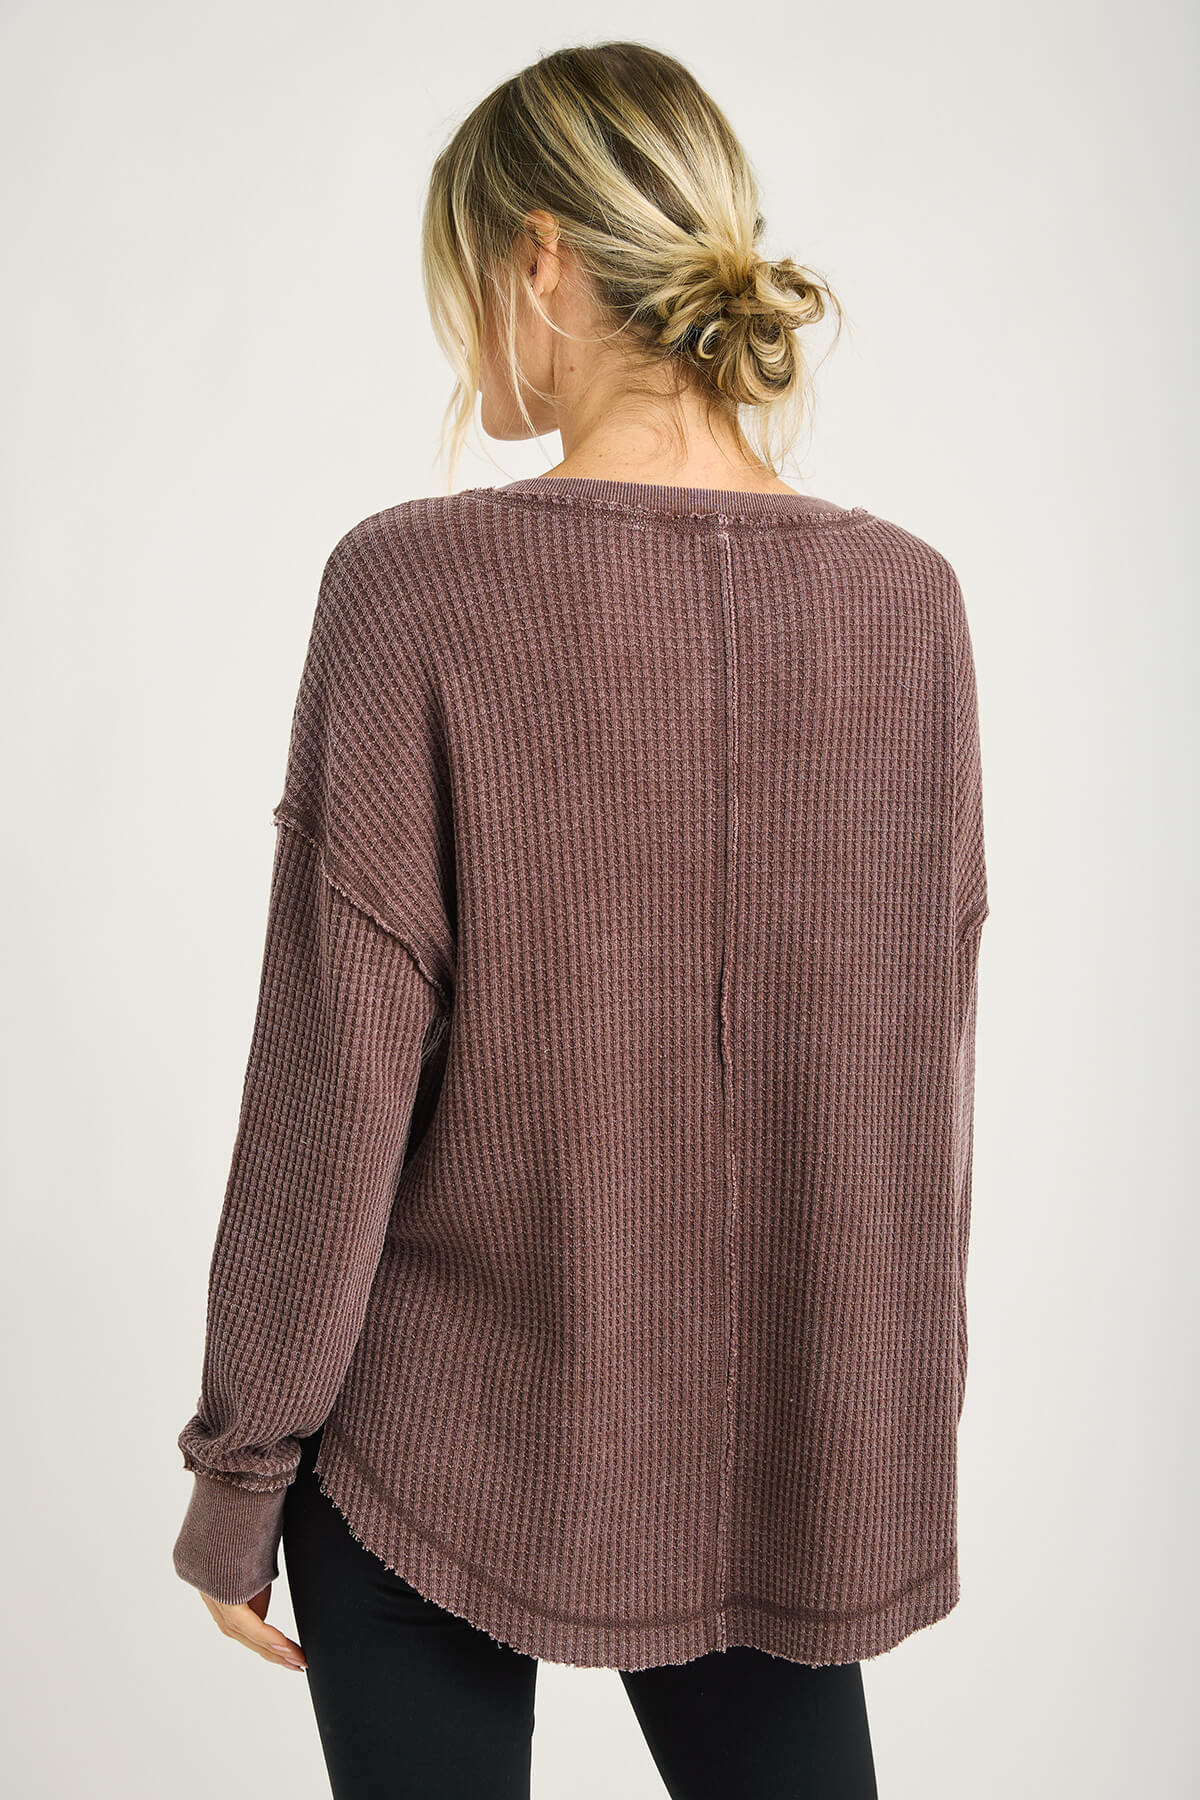 Z Supply Driftwood Thermal Long Sleeve Top